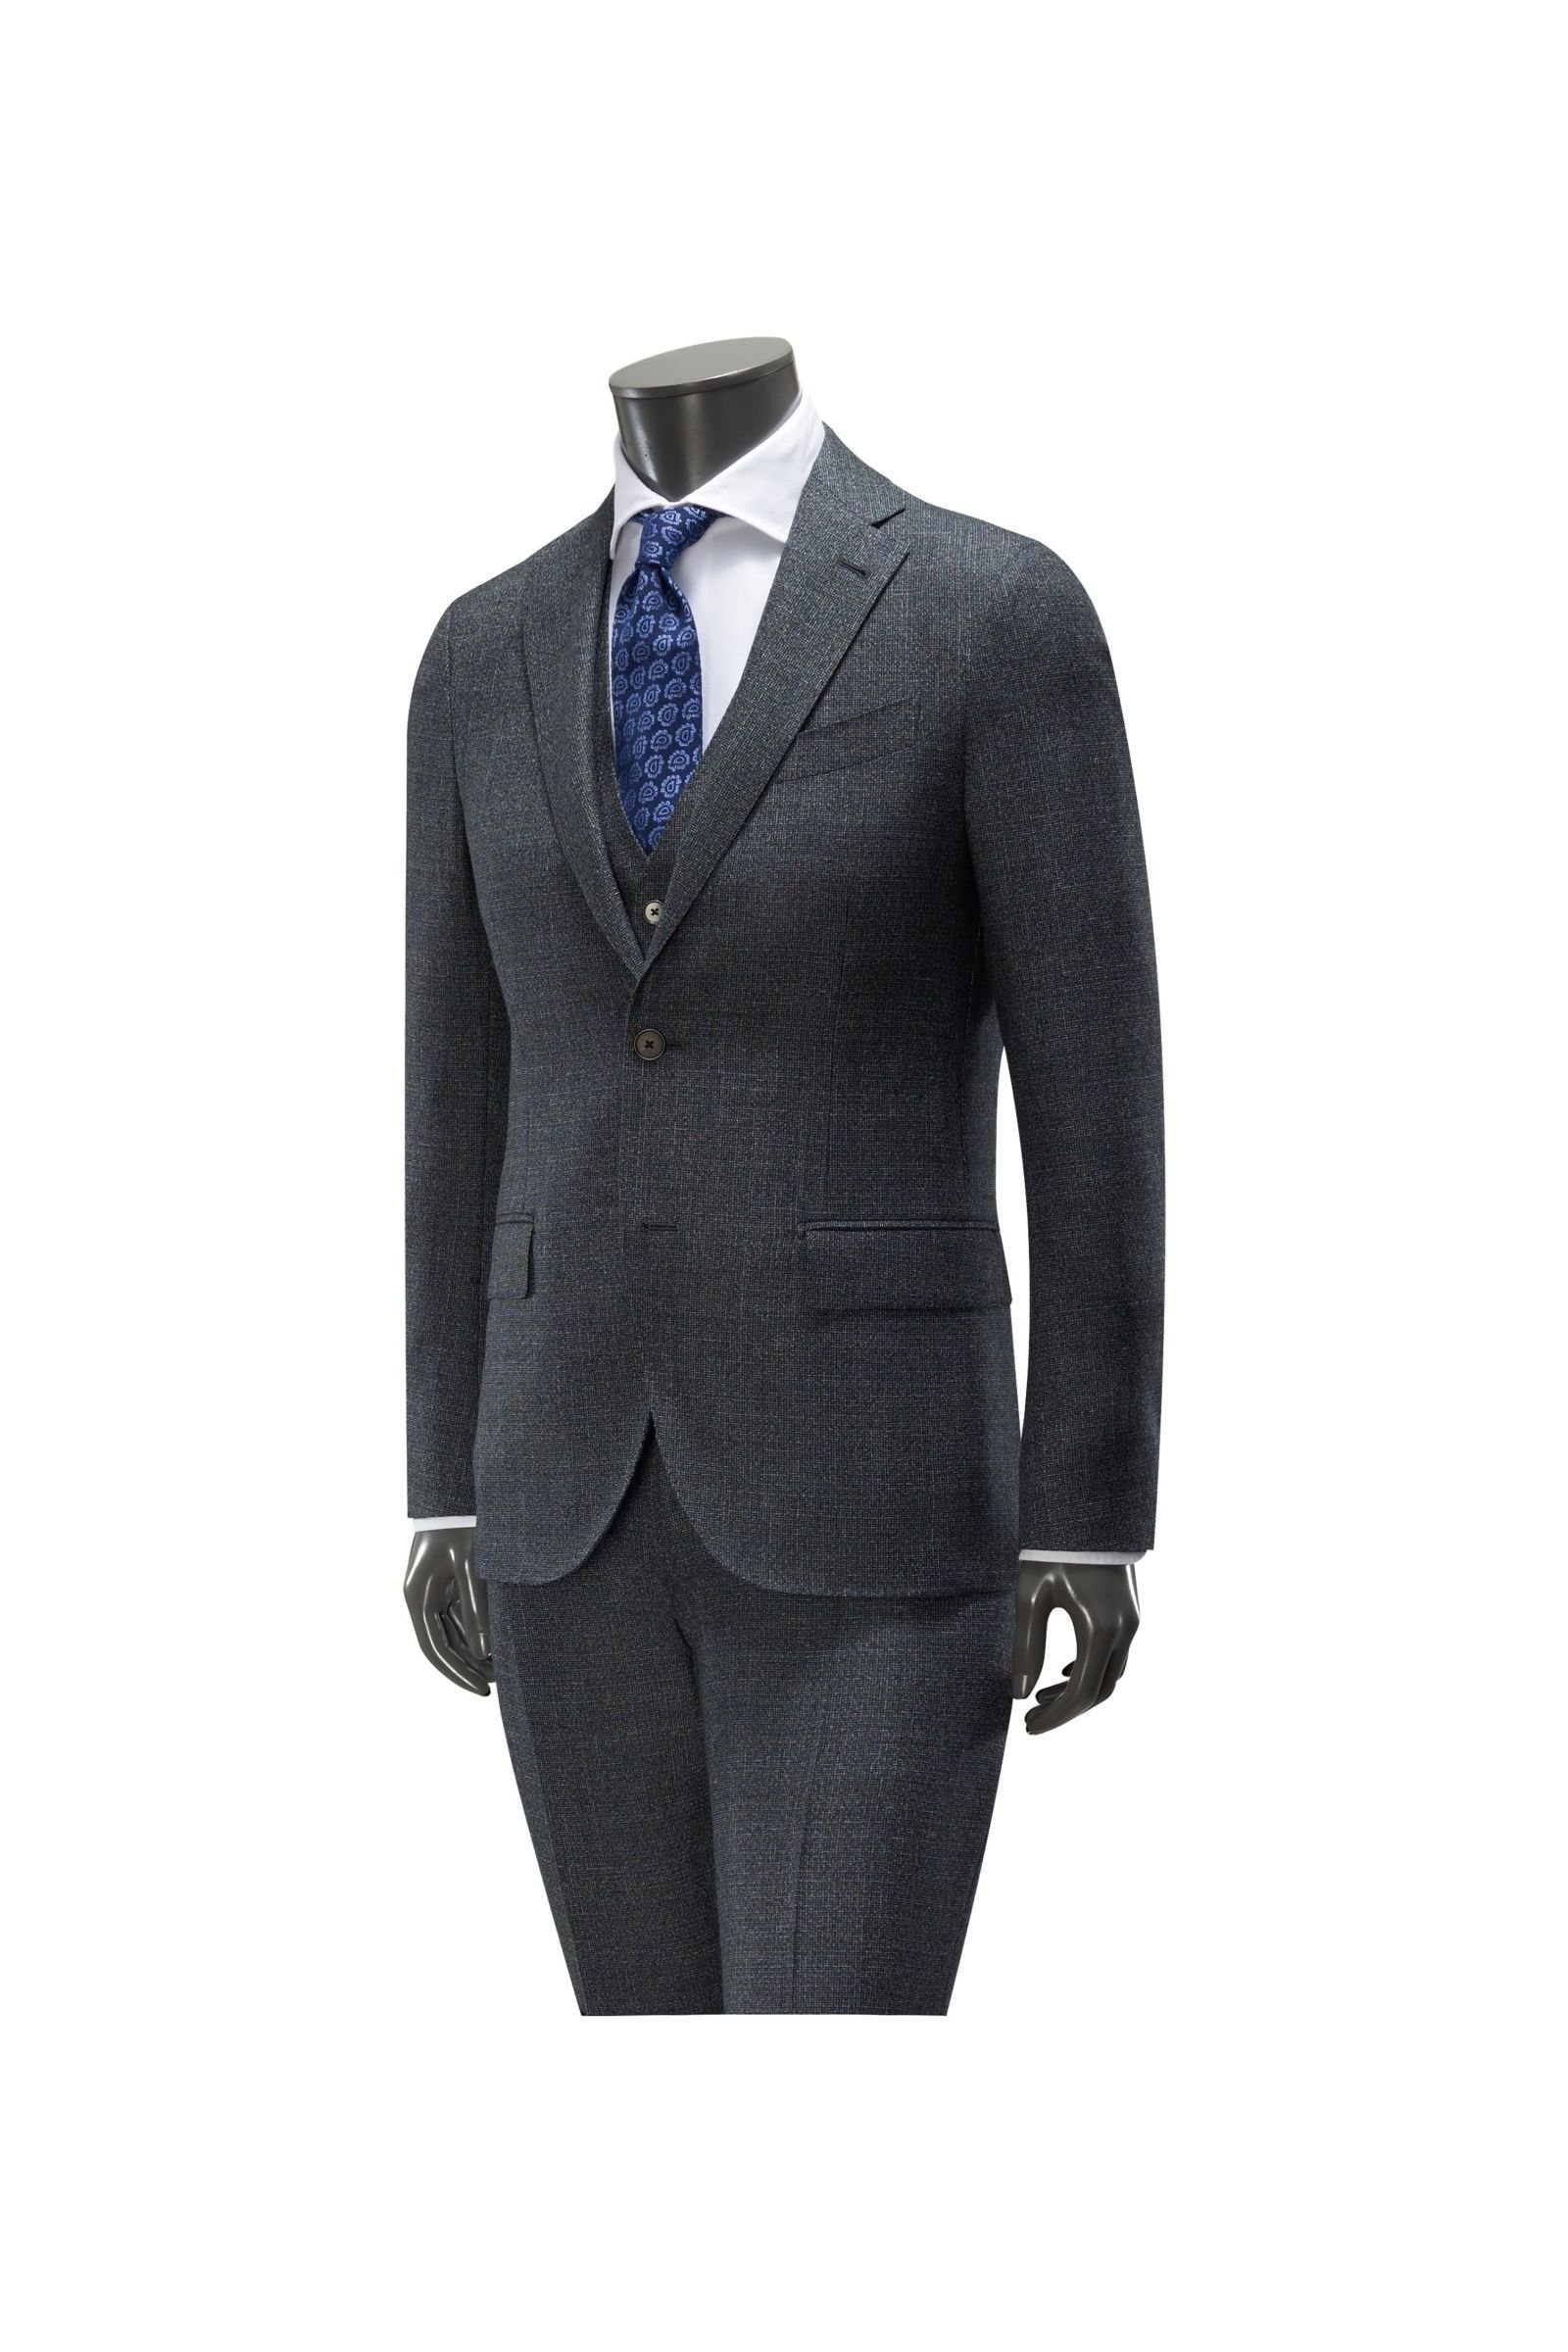 Suit with waistcoat dark grey patterned